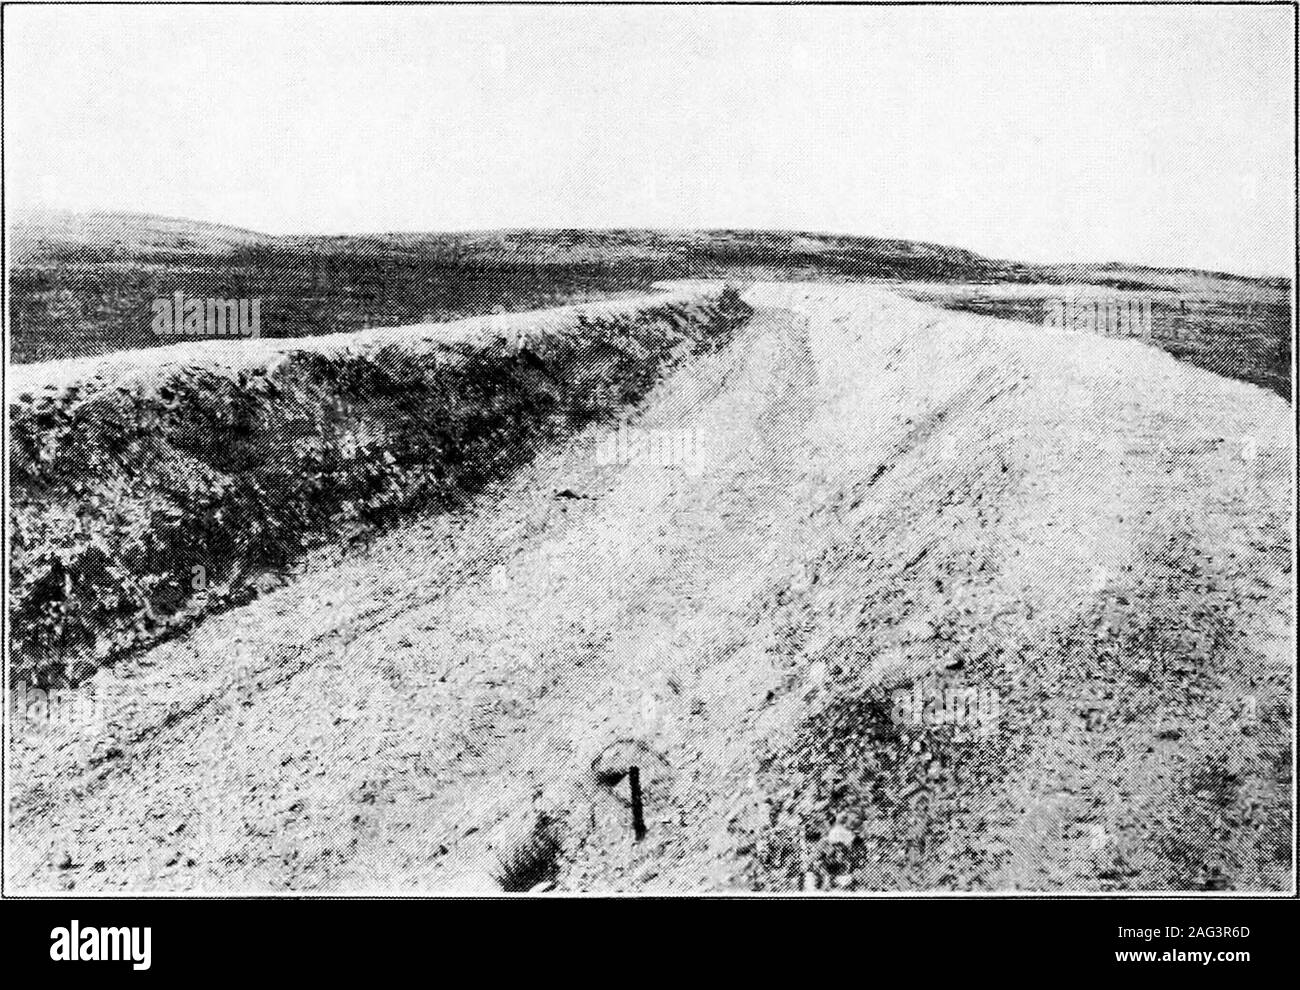 . Principles of irrigation engineering, arid lands, water supply, storage works, dams, canals, water rights and products. Fig. C.—Excavating canal by use of excavator with belt conveyor, drawn bytraction engine. Belle Fourche Project, So. Dak.. Fig. D.—Finished canal with both upper and lower banks. Lower Yellowstone Project, Mont. DESIGN AND CONSTRUCTION OF CANALS 49 In building embankments team work has an advantage over othermethods on account of the consolidation of the embankments dueto the tramping of the animals. When embankments to hold waterare built by other methods it is necessary t Stock Photo